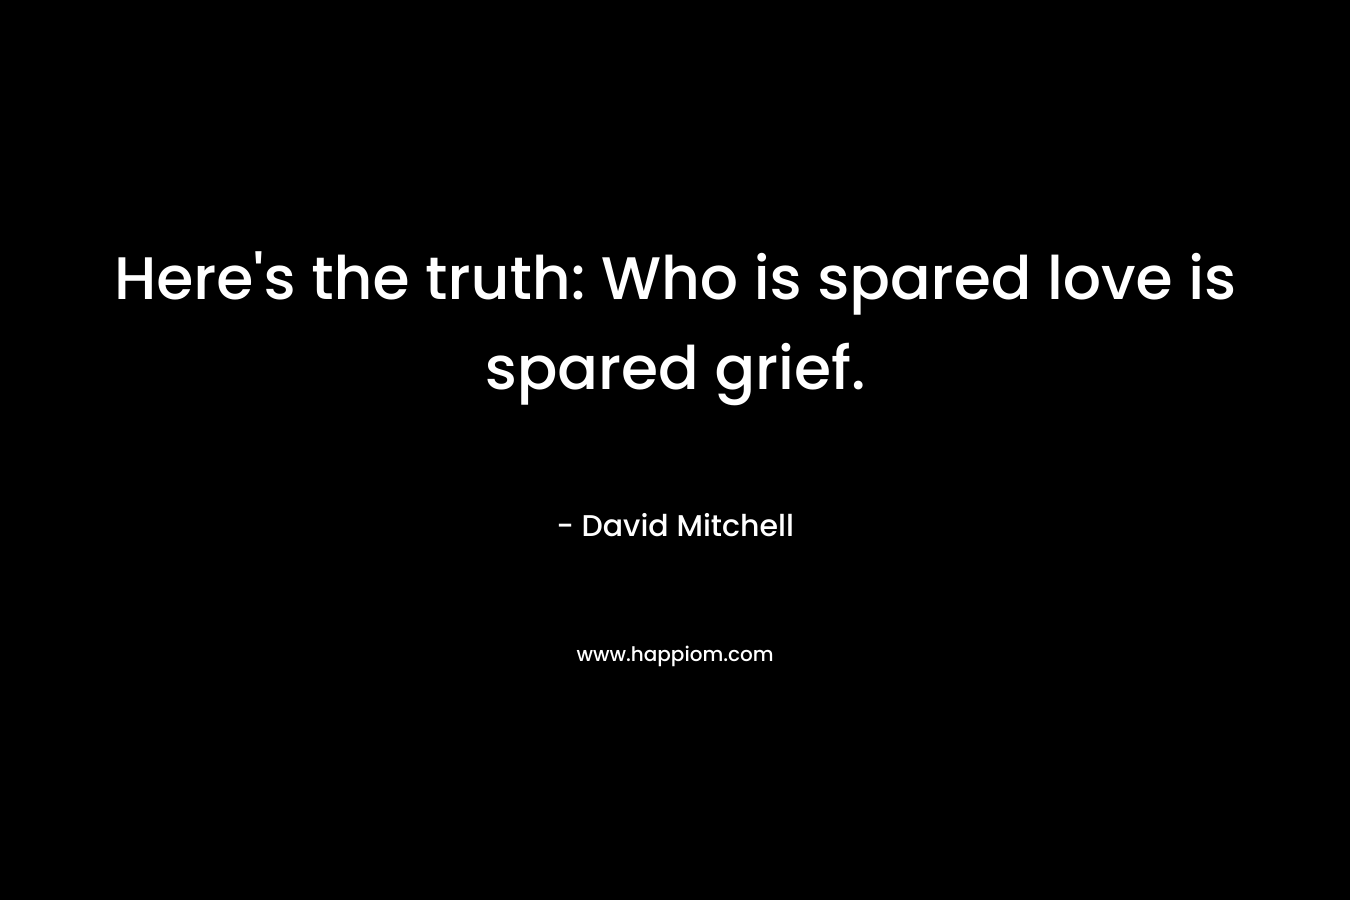 Here’s the truth: Who is spared love is spared grief. – David Mitchell